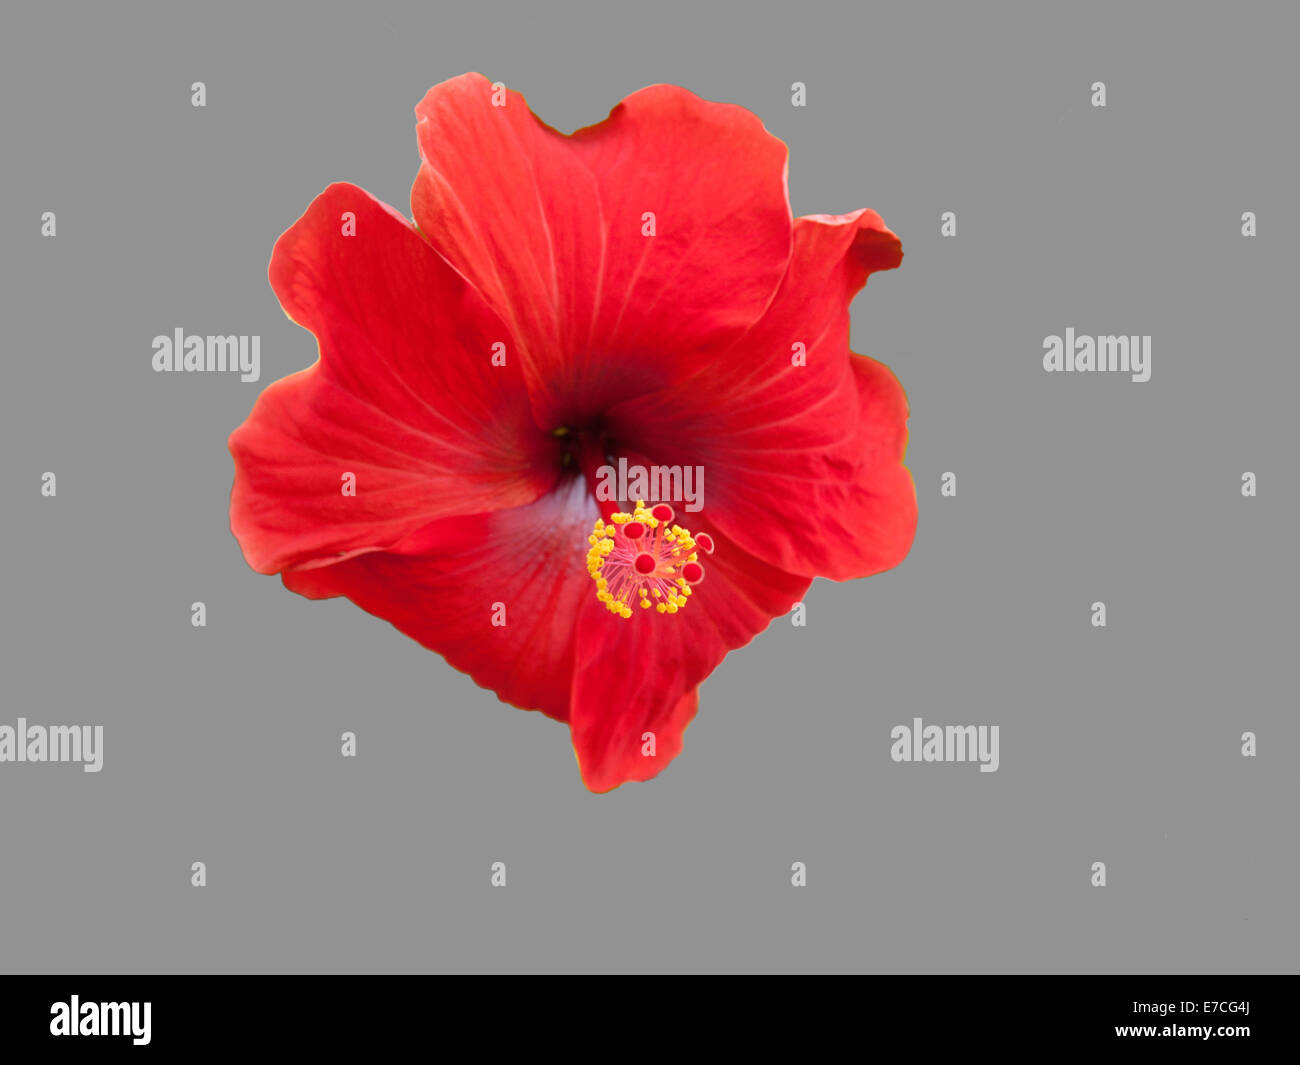 Hibiscus flower isolated on gray Banque D'Images